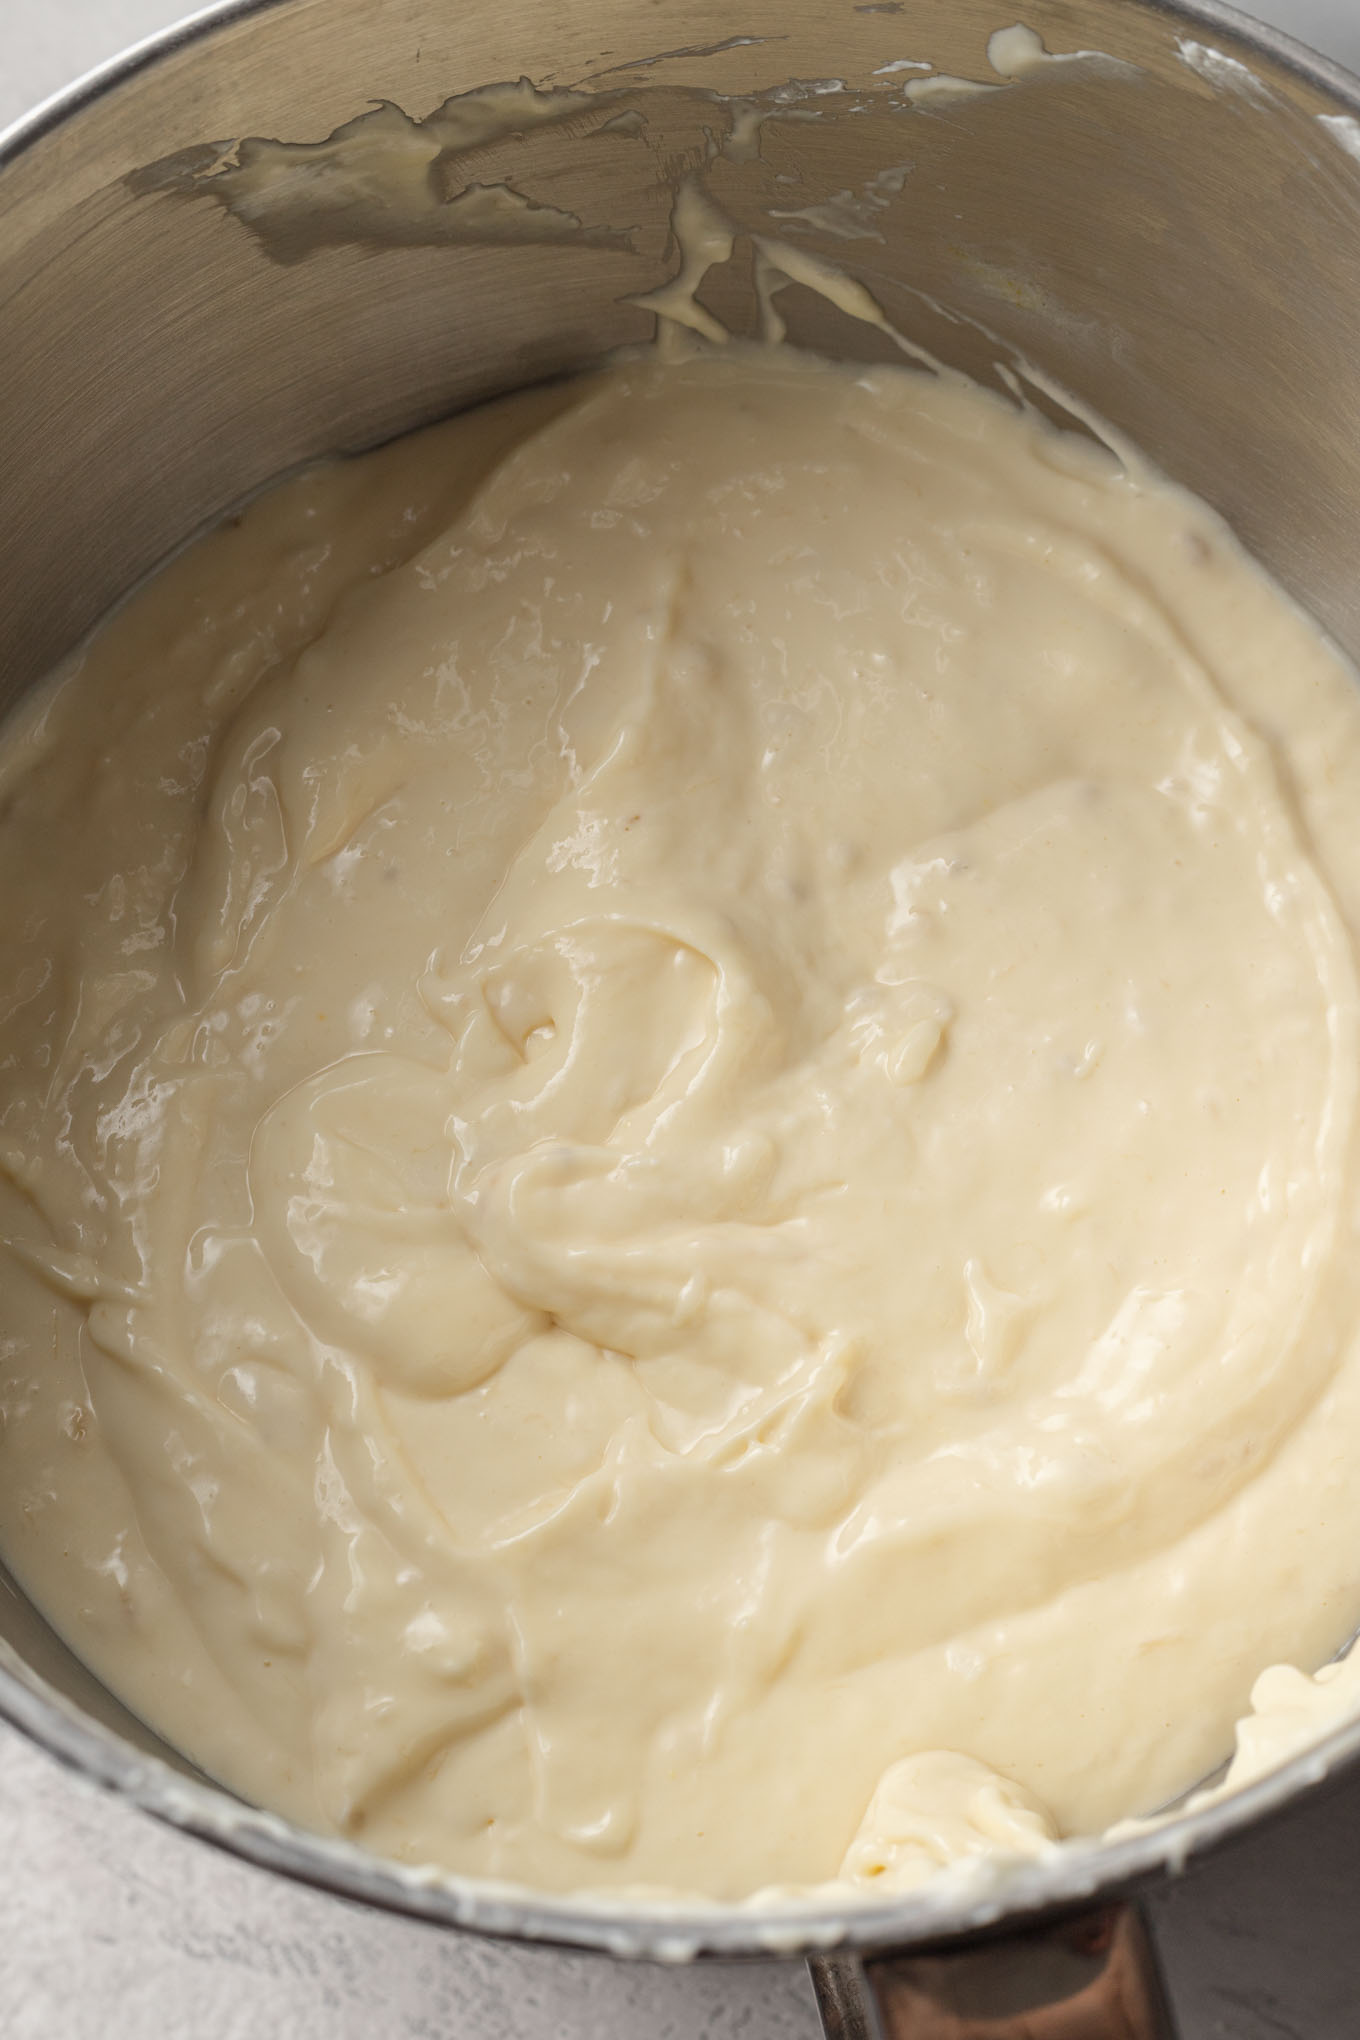 Banana cheesecake filling in a mixing bowl, seen from above.